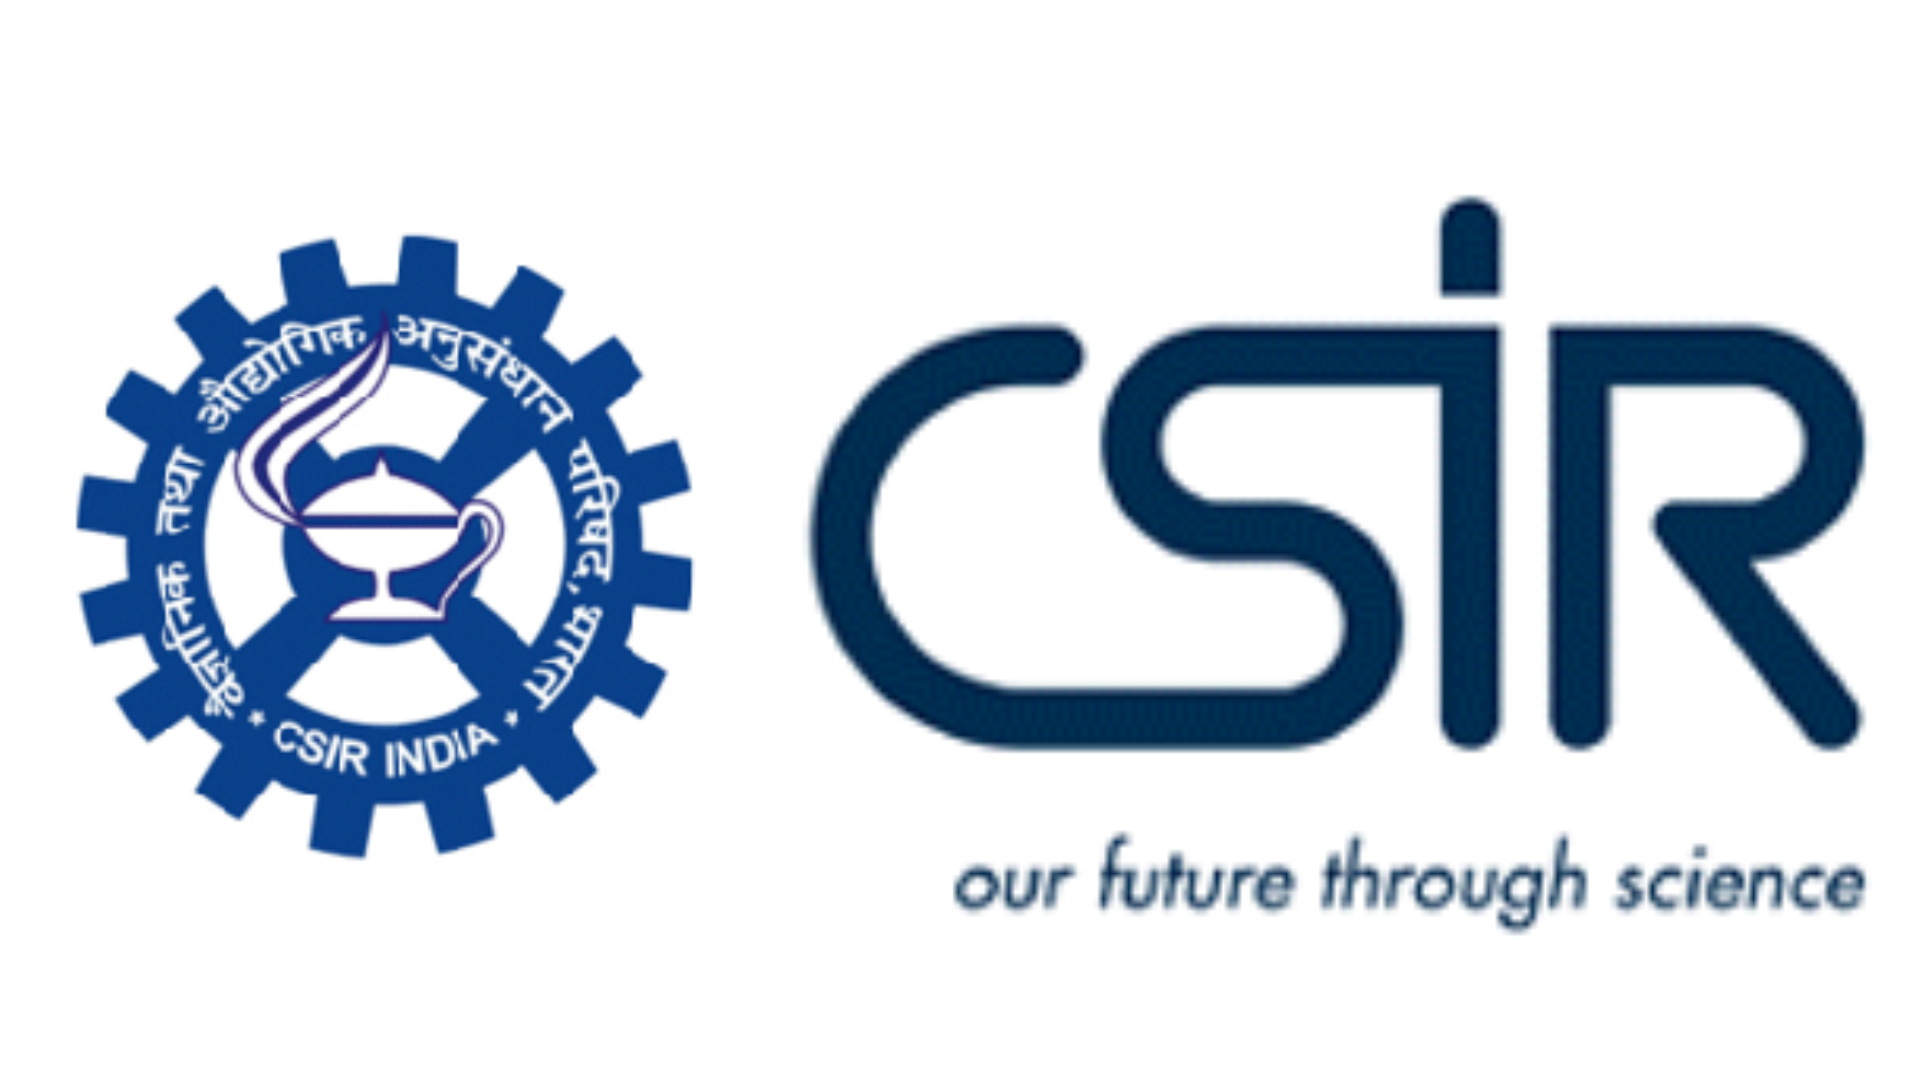 Fifteen of 45 Companies have Defaulted on CSIR Loans